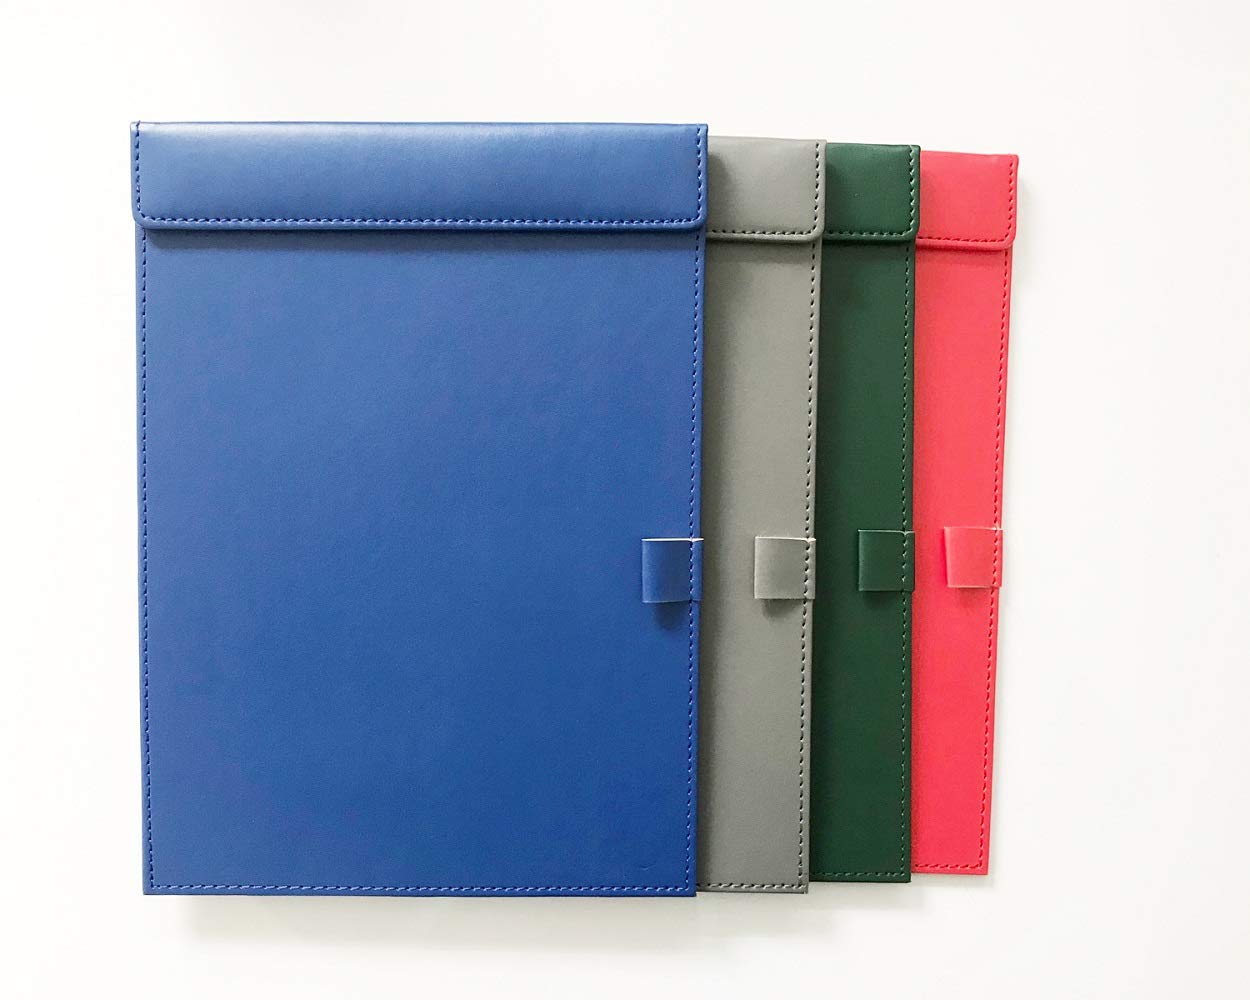 NJ Silk Smooth PU Leather Writing Clipboard, Business Meeting Magnetic Pad with Pen Holder: 4 Pcs Set